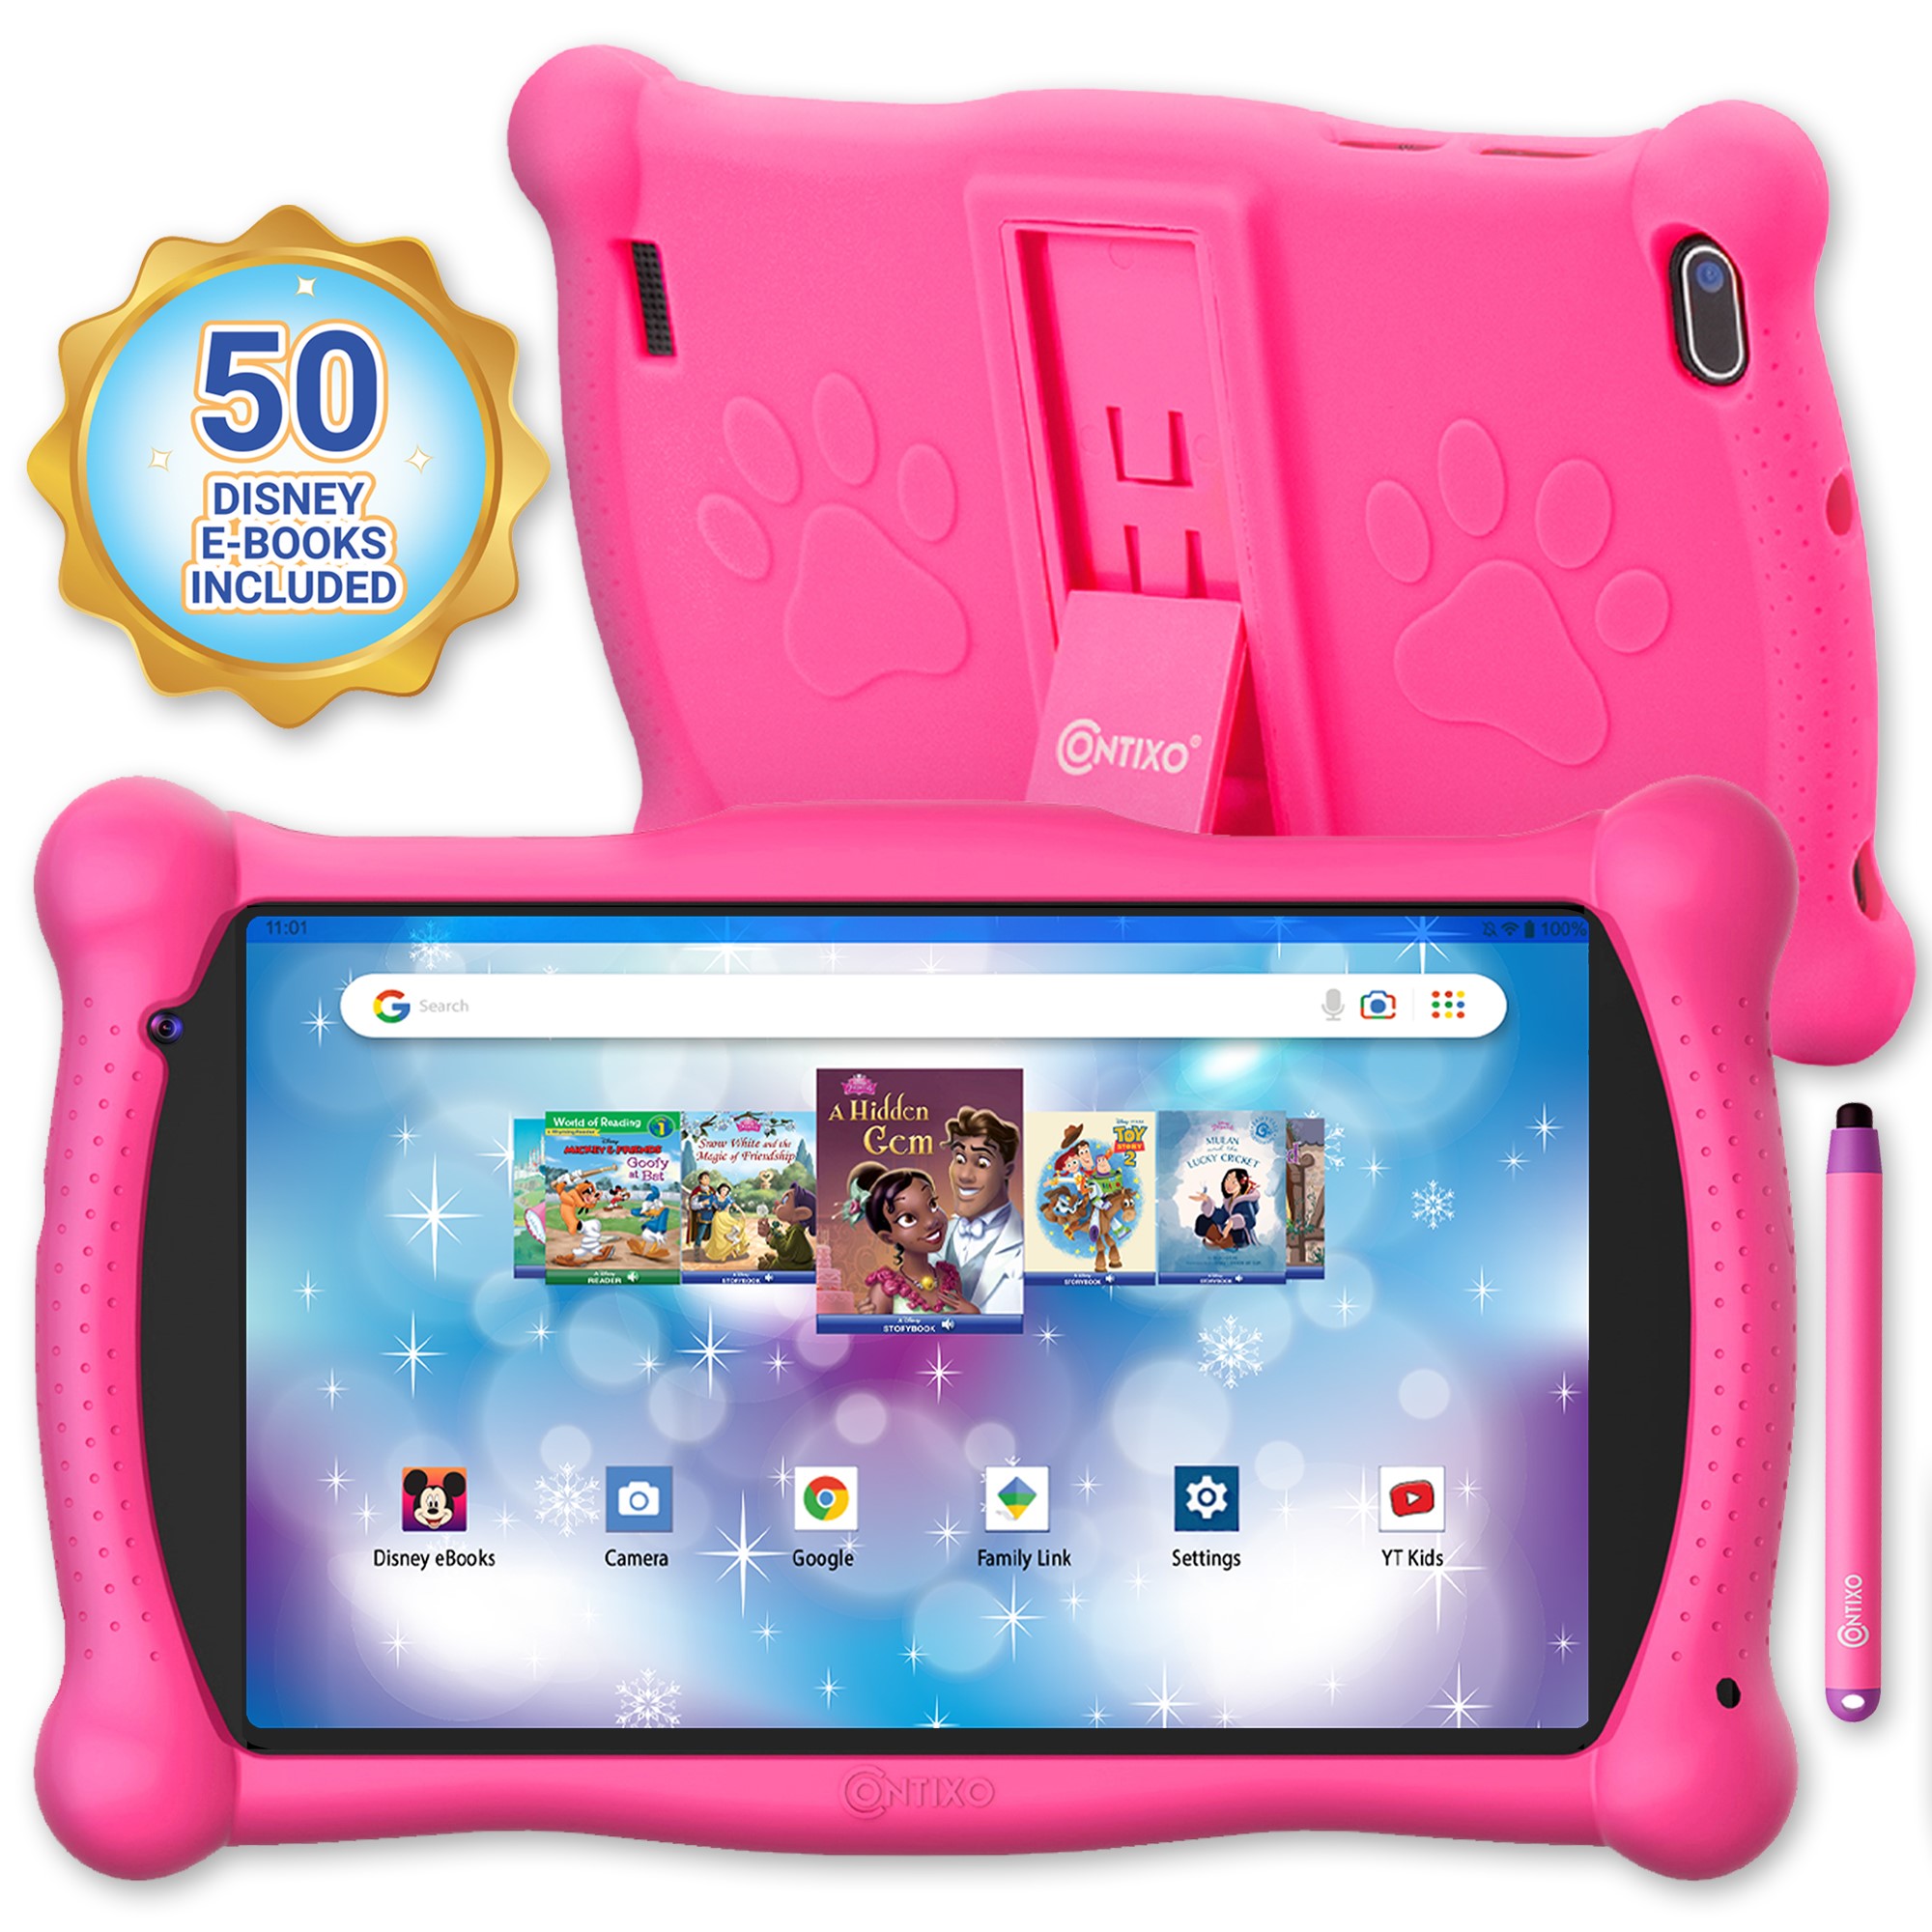 Contixo V10 7" Kids Tablet, with Headphone and Tablet Bag Bundle, 32GB Storage, 50+ Disney eBooks, Shockproof Case w/ Kickstand and Stylus - Pink - image 4 of 7